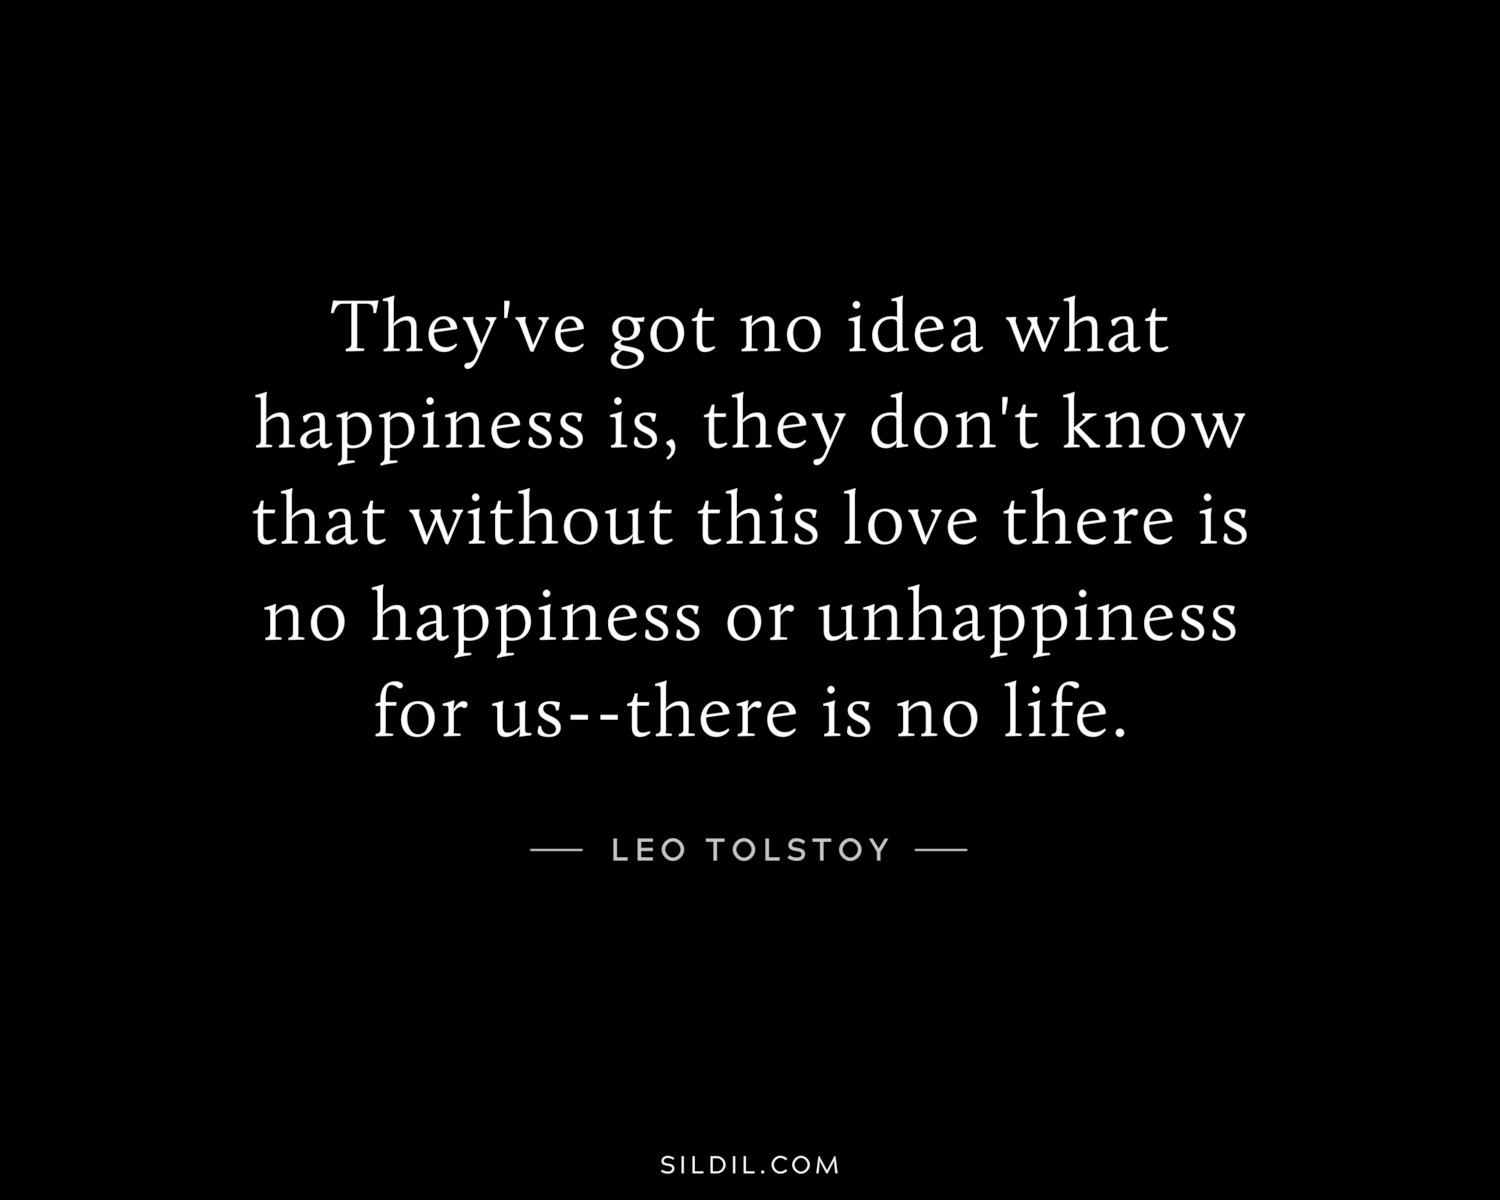 They've got no idea what happiness is, they don't know that without this love there is no happiness or unhappiness for us--there is no life.